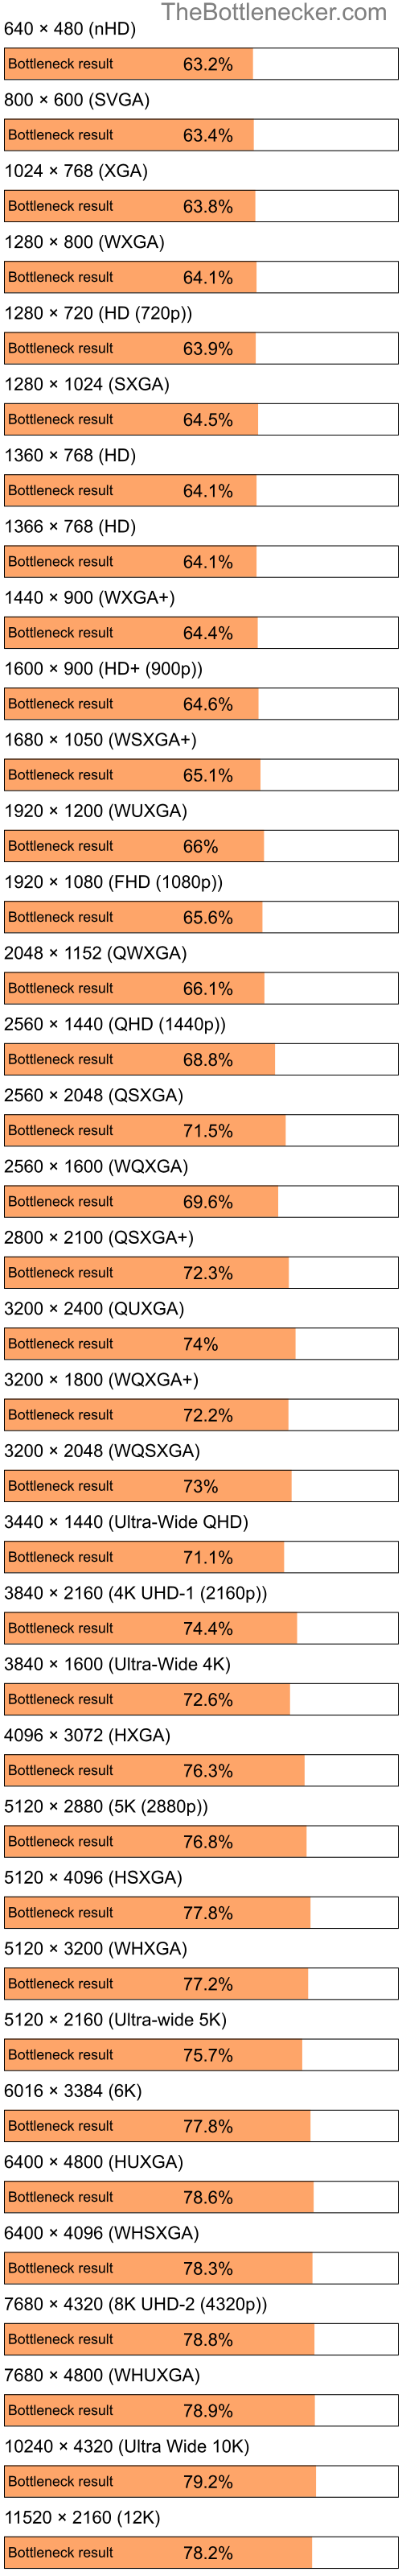 Bottleneck results by resolution for Intel Atom Z520 and NVIDIA Quadro FX 370M in General Tasks